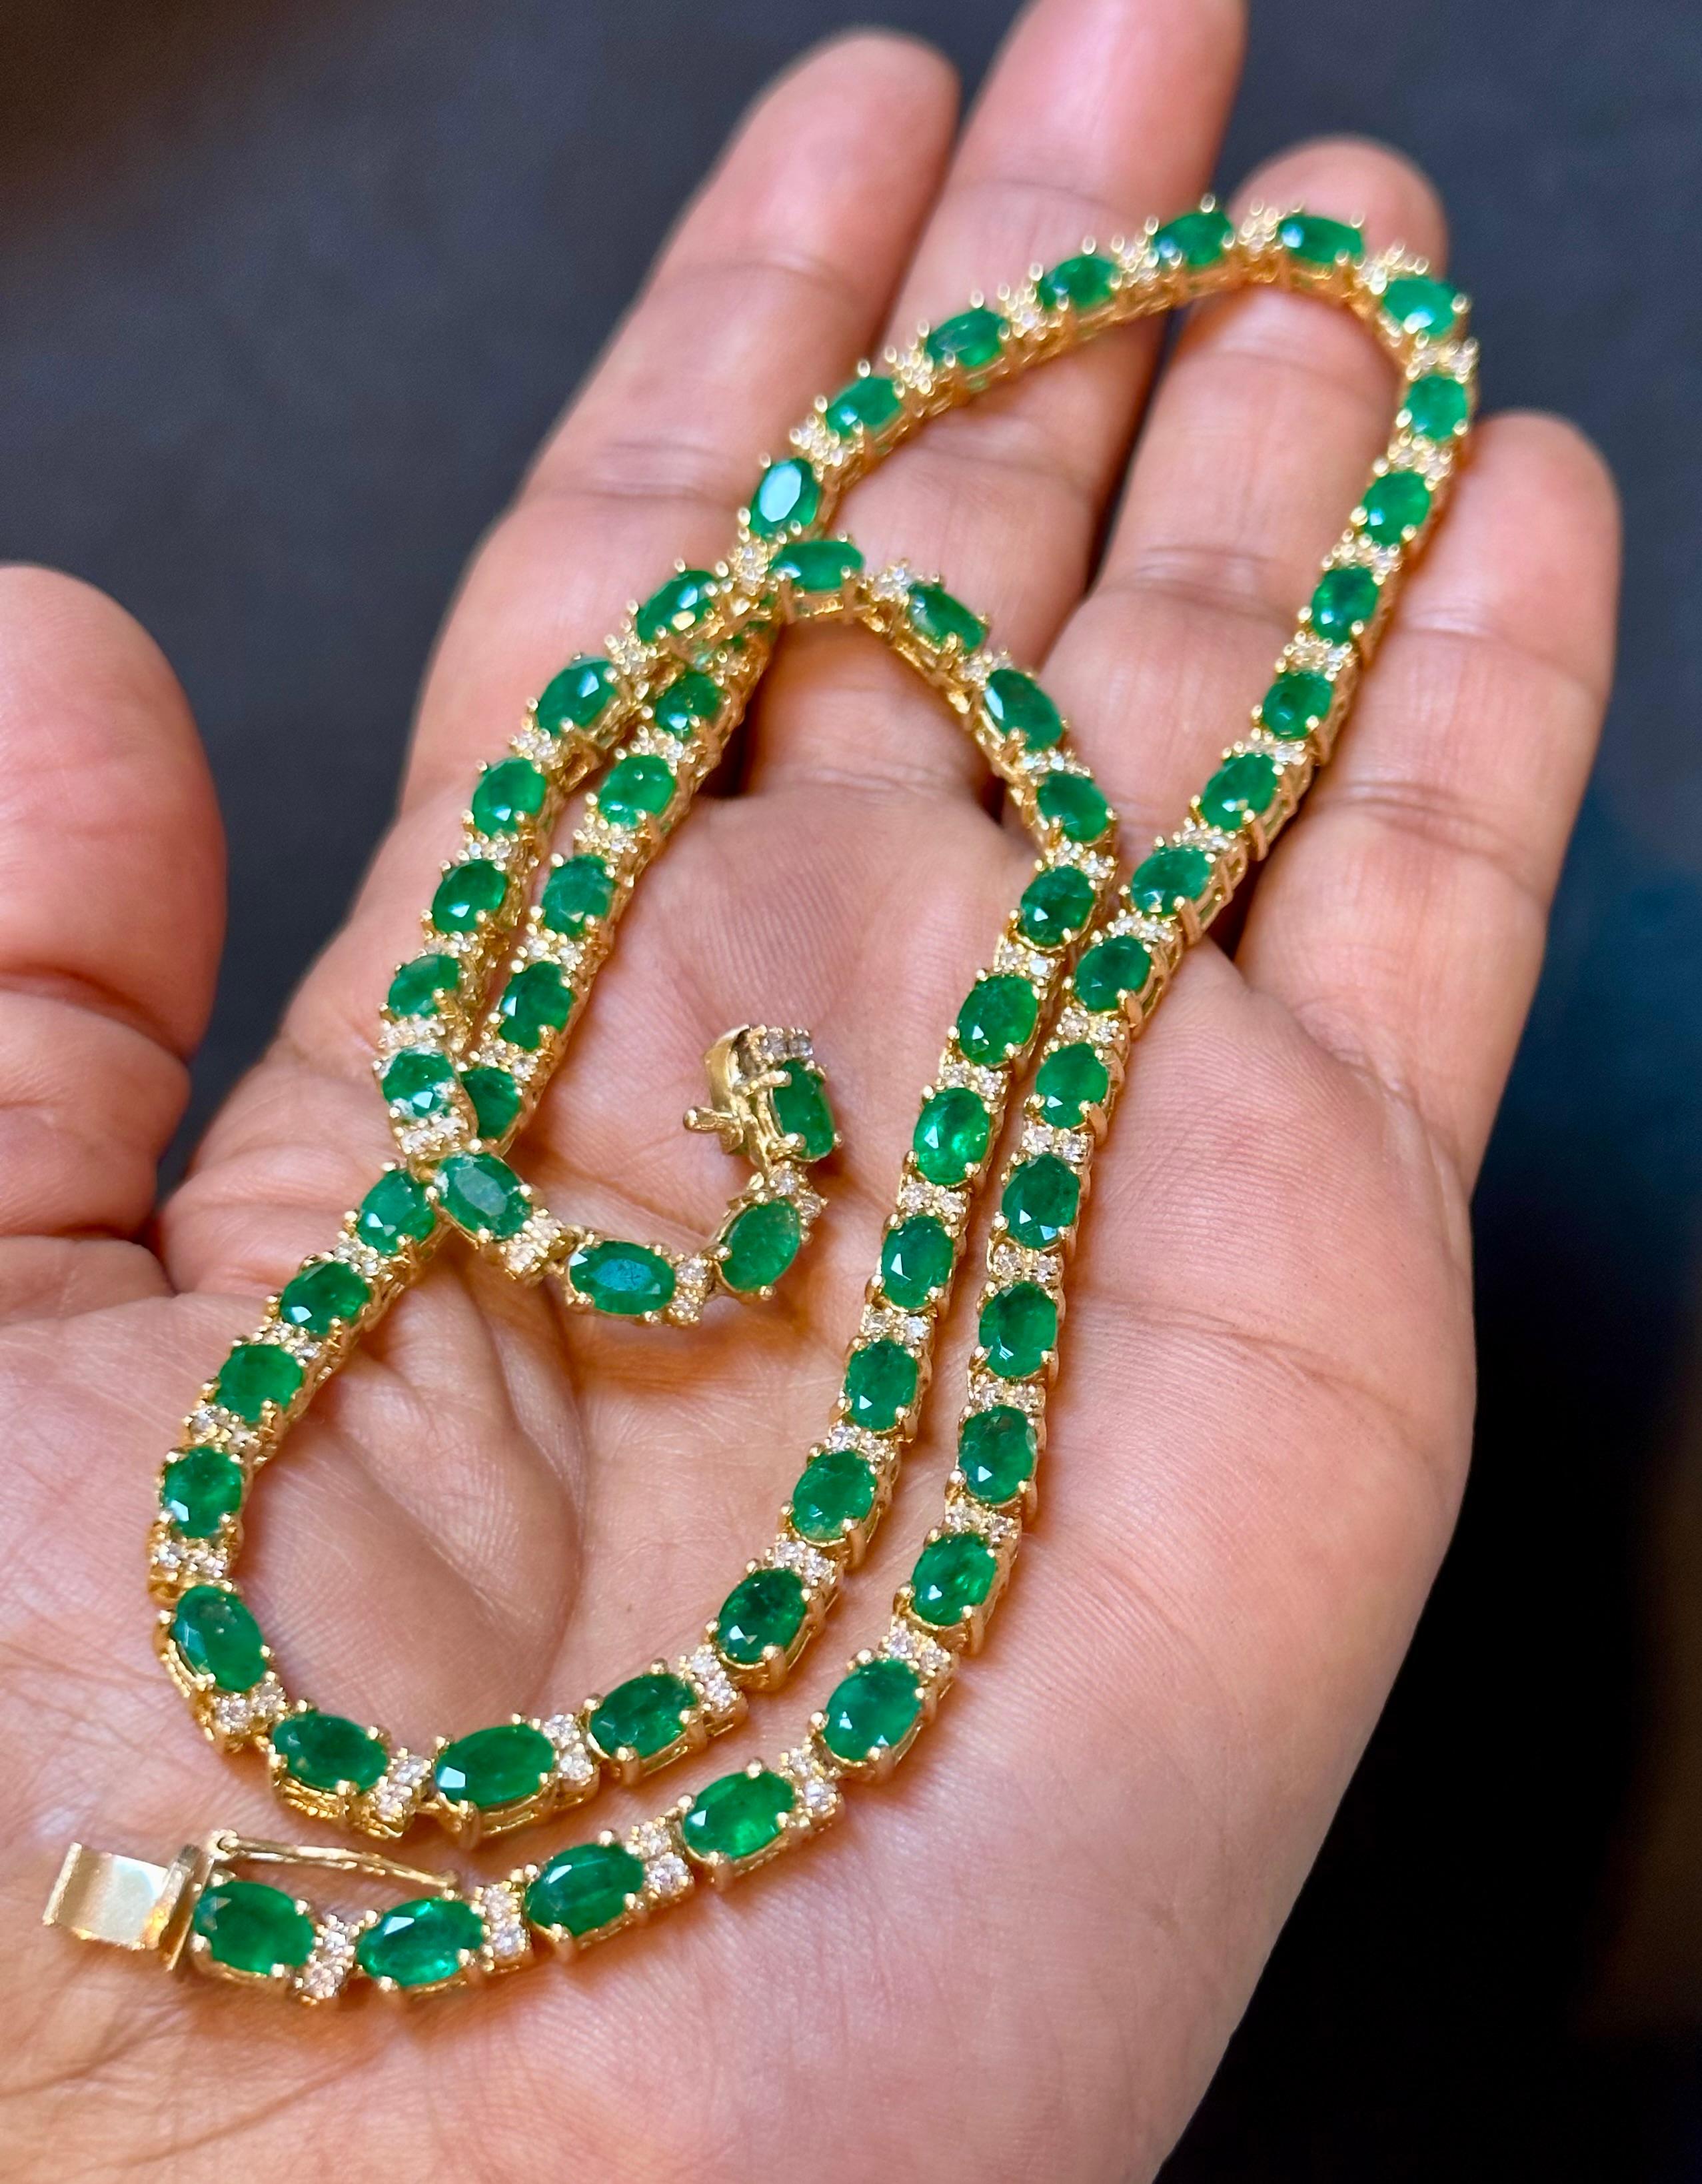 Sugarloaf Cabochon 38 Ct Oval Natural Brazilian Emerald & 4 Ct Diamond Tennis Necklace 14KYG 24